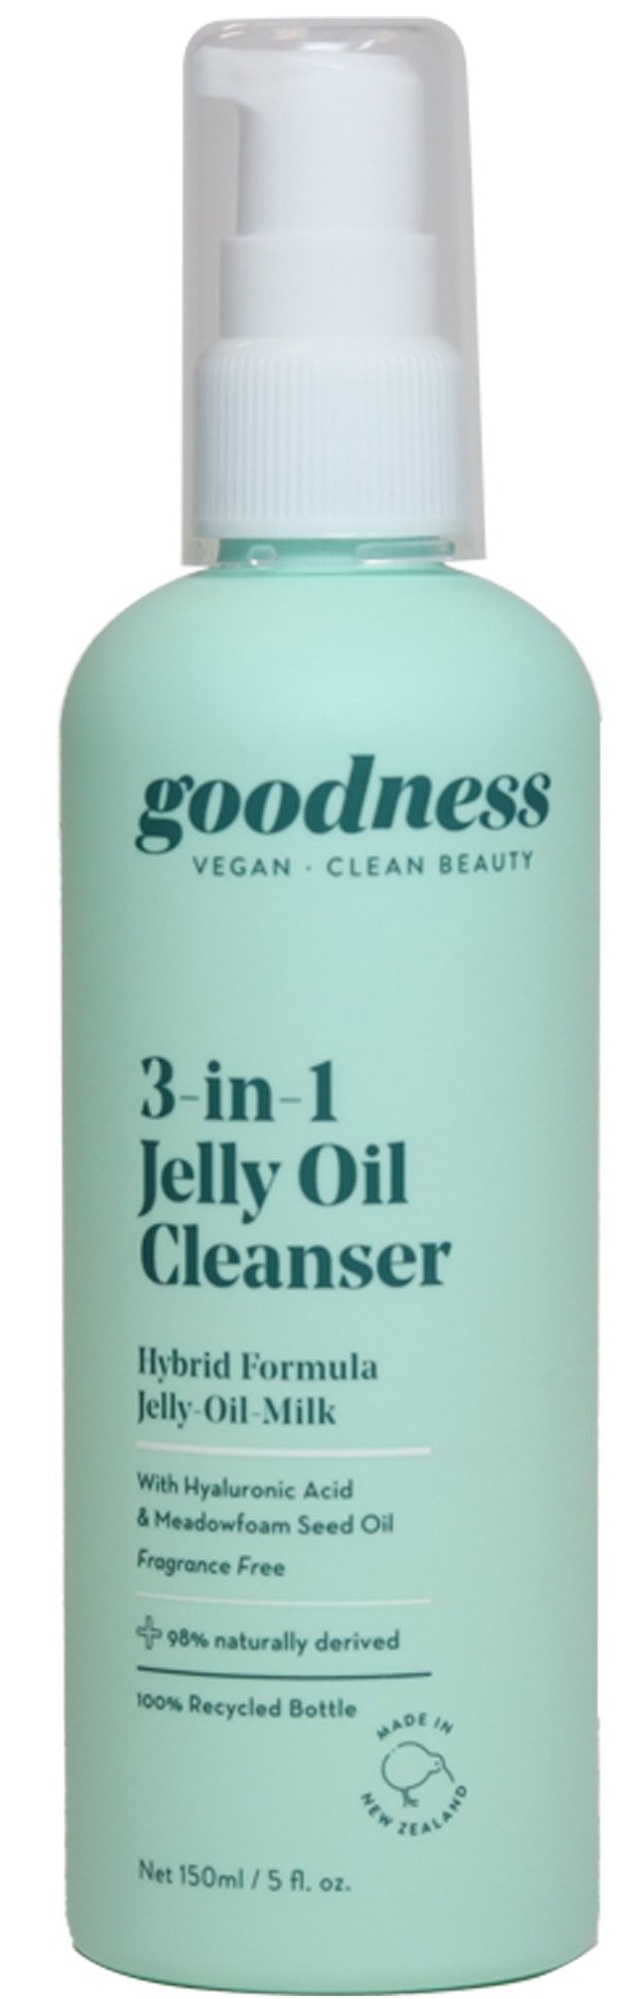 Goodness 3 In 1 Jelly Oil Cleanser